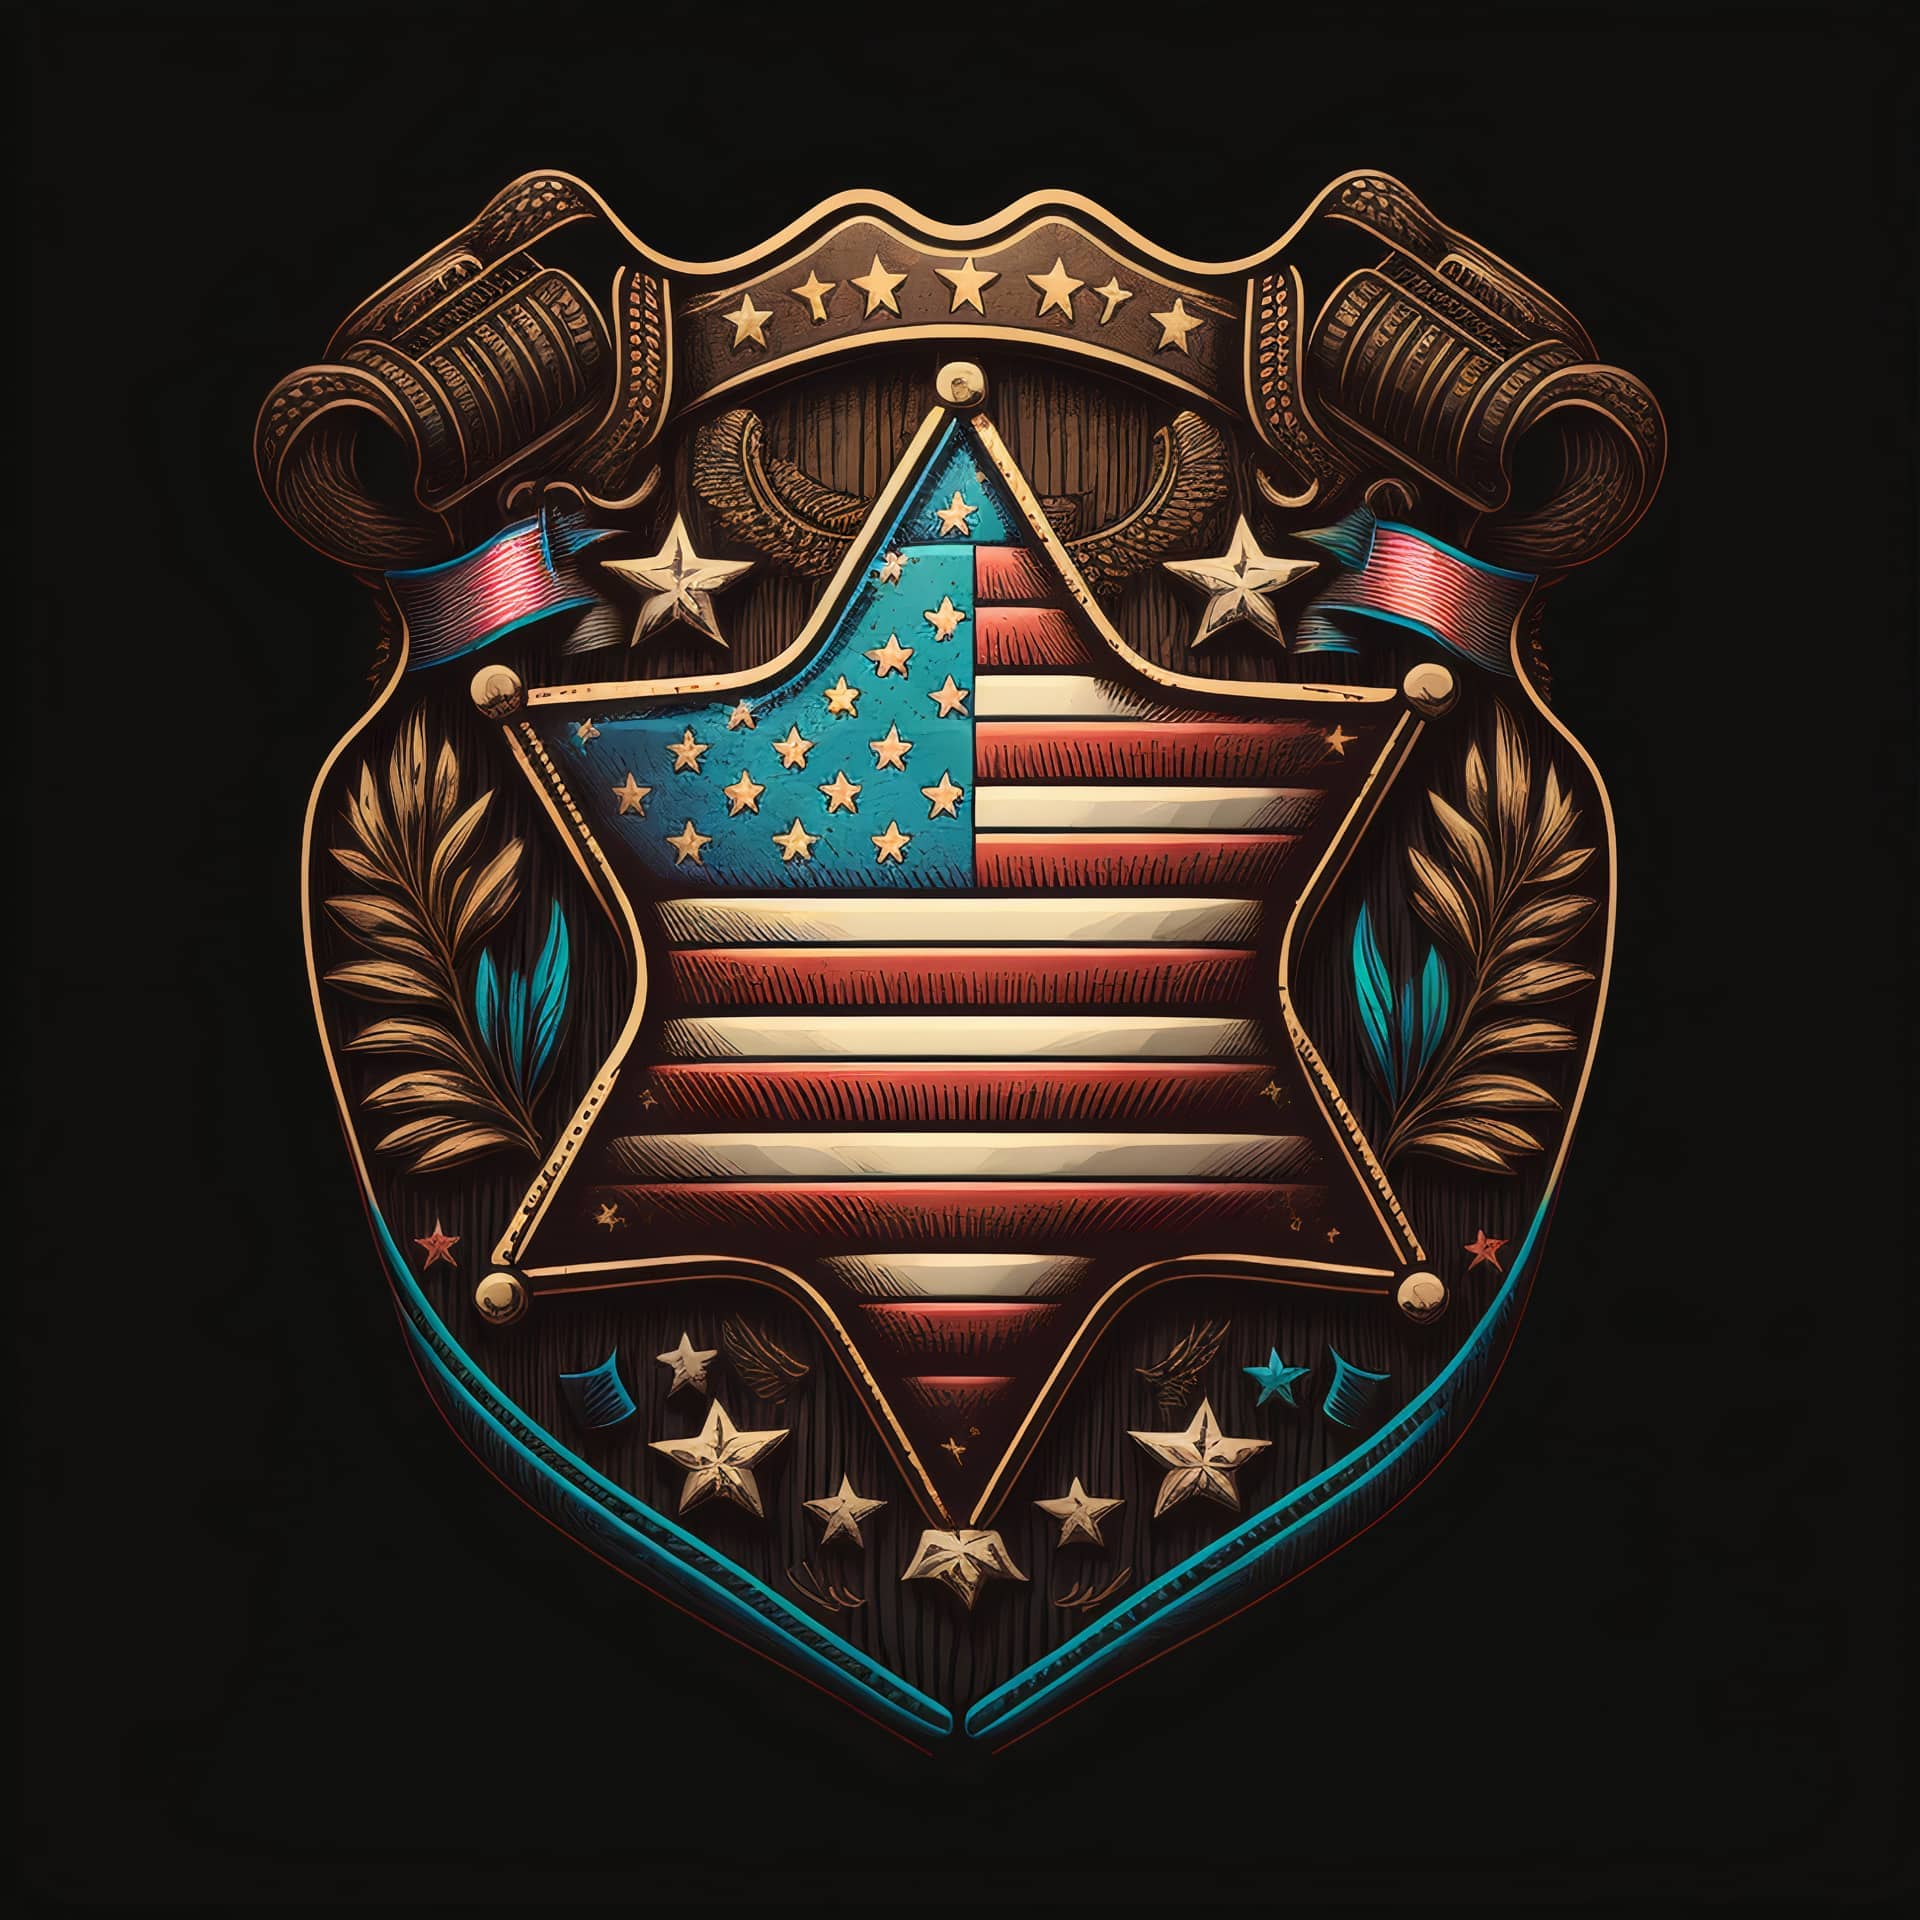 Sheriff badge design with american flag